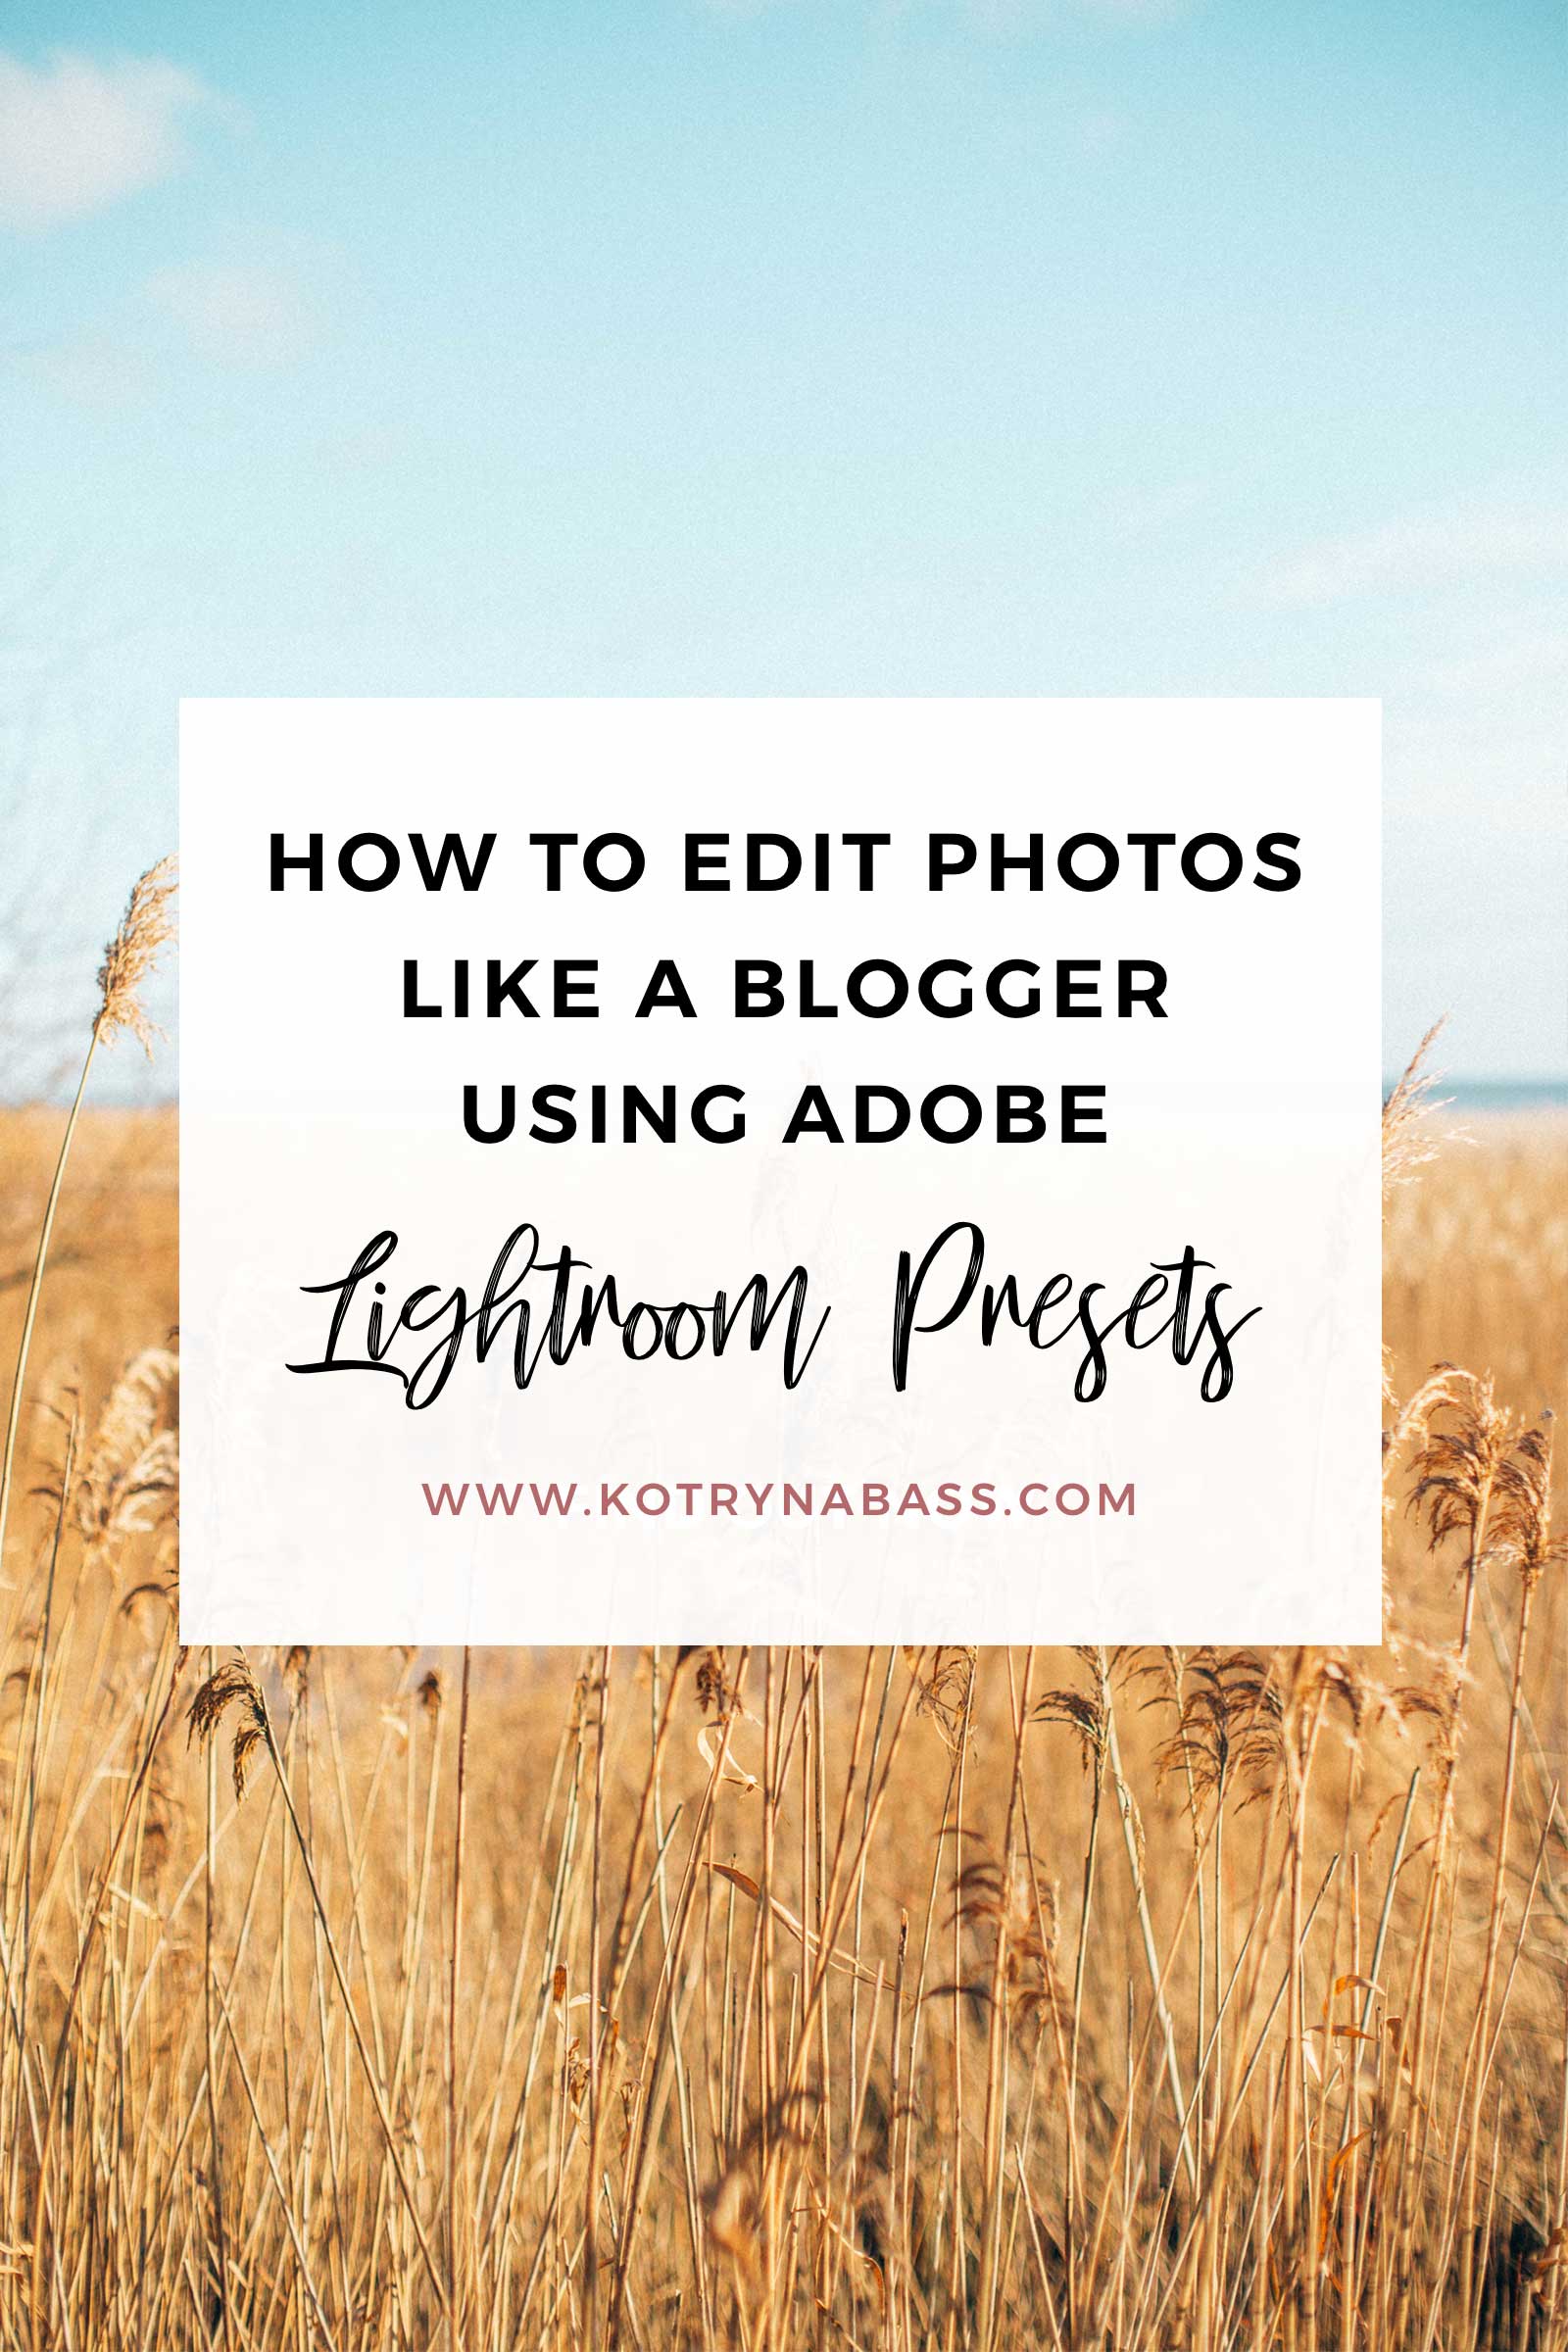 Bloggers take the coolest shots, no doubts. I get questions about my photography constantly and the funny thing is- I'm not even that great at it, it's all in the editing. Want to learn how to edit photos like a blogger? Keep on reading...